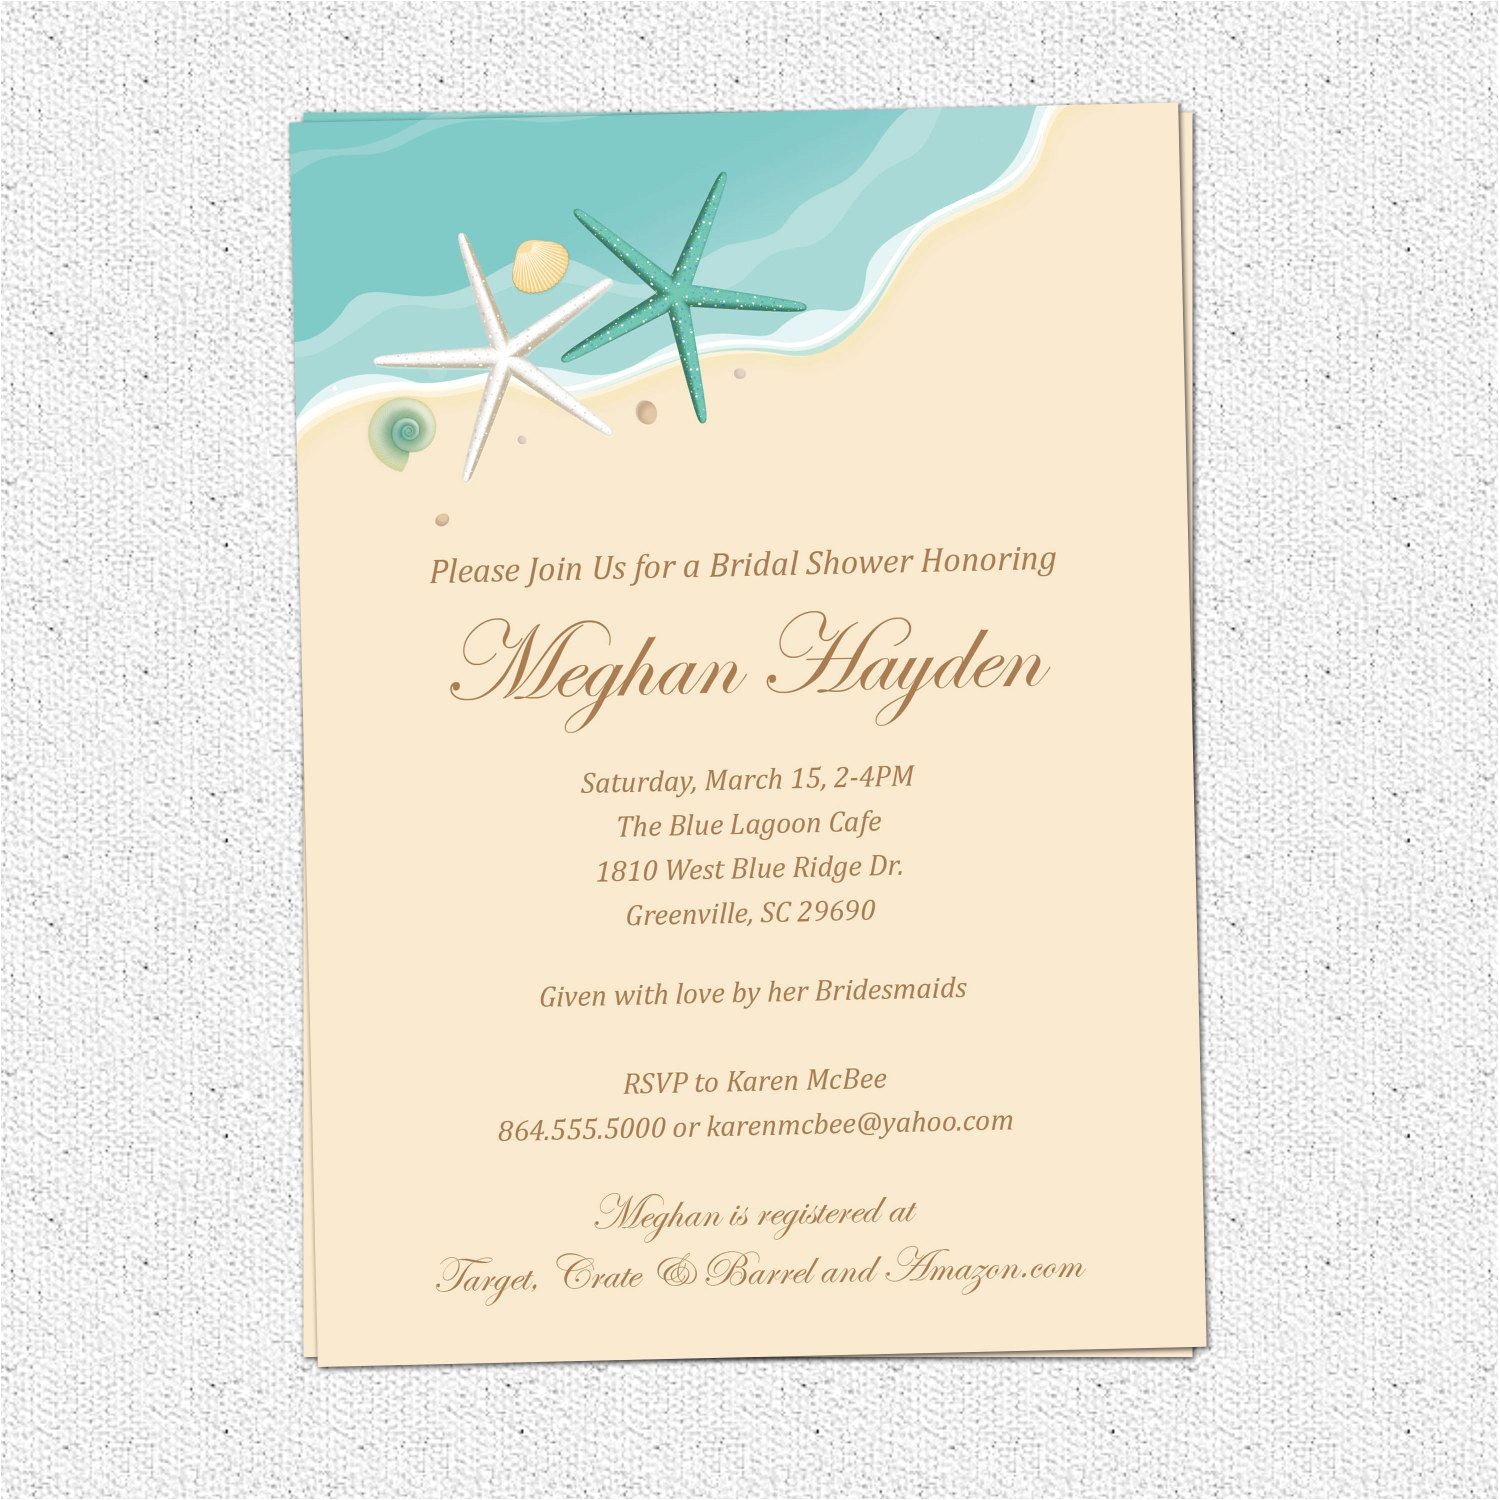 How to Word Bridal Shower Invitations Create Bridal Shower Invitation Wording Invitations